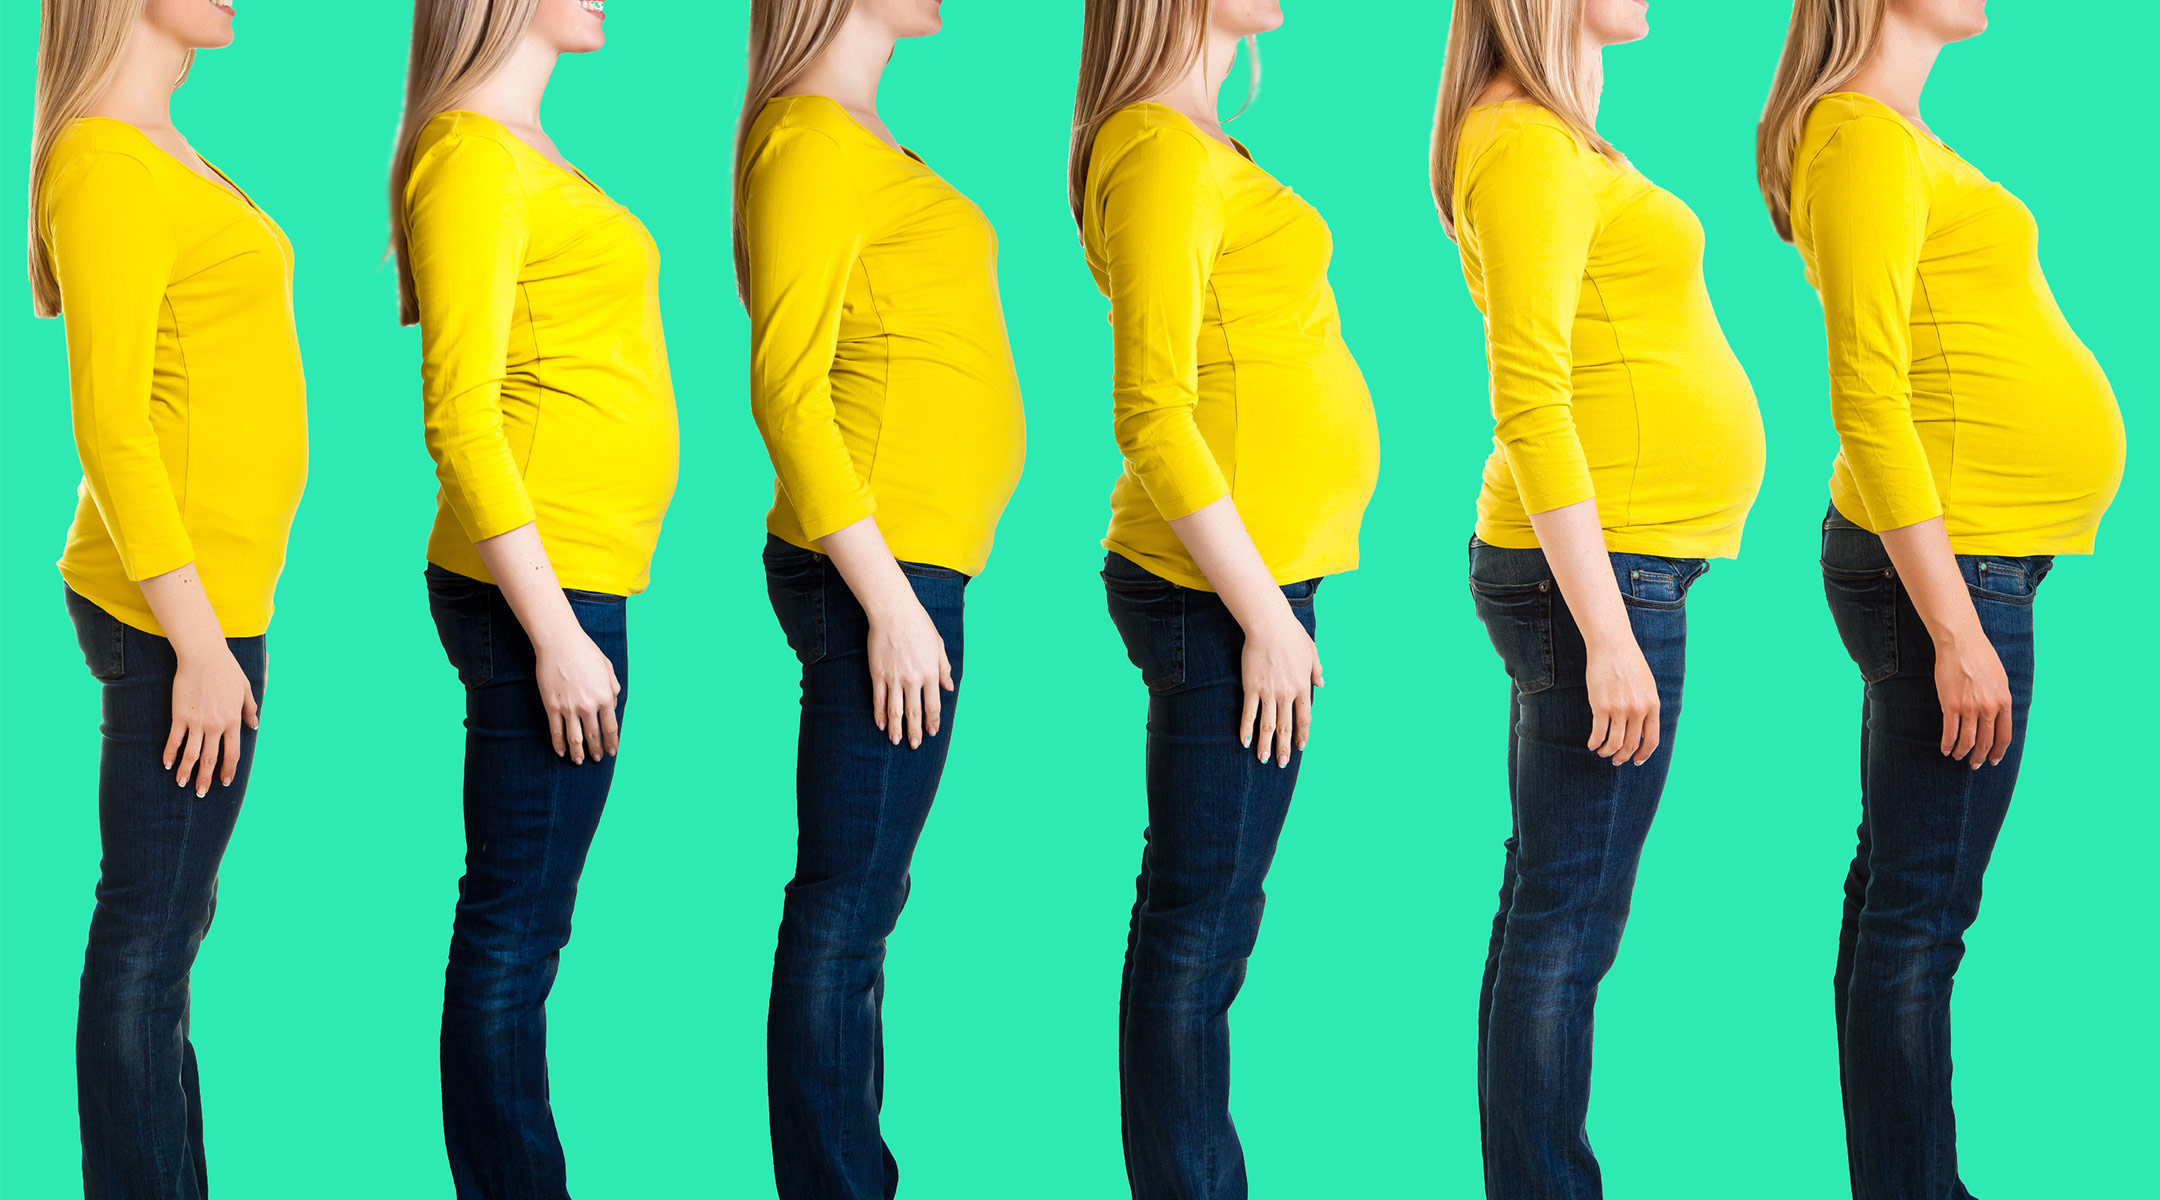 several images of one woman's pregnancy progression over time